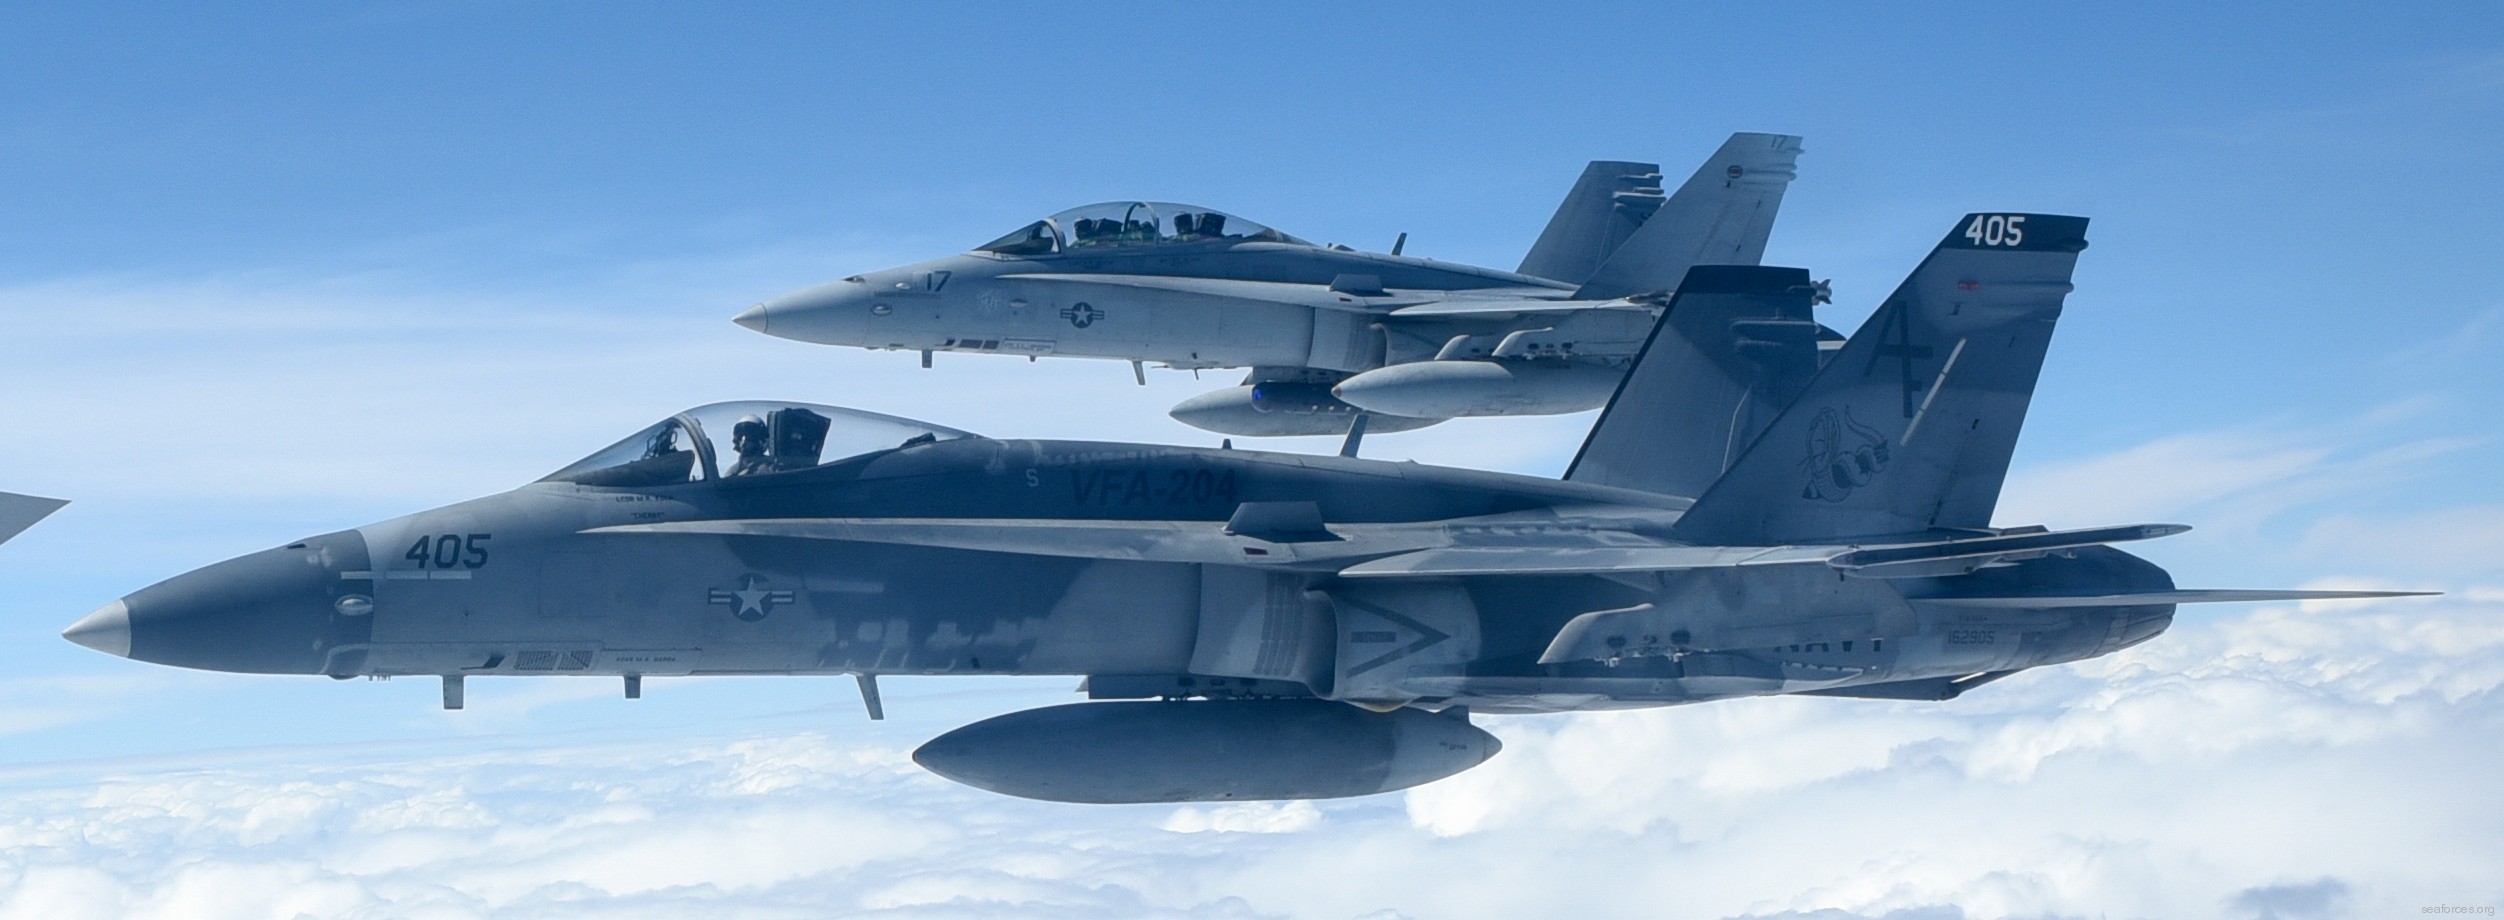 vfa-204 river rattlers f/a-18a+ hornet strike fighter squadron us navy reserve 19